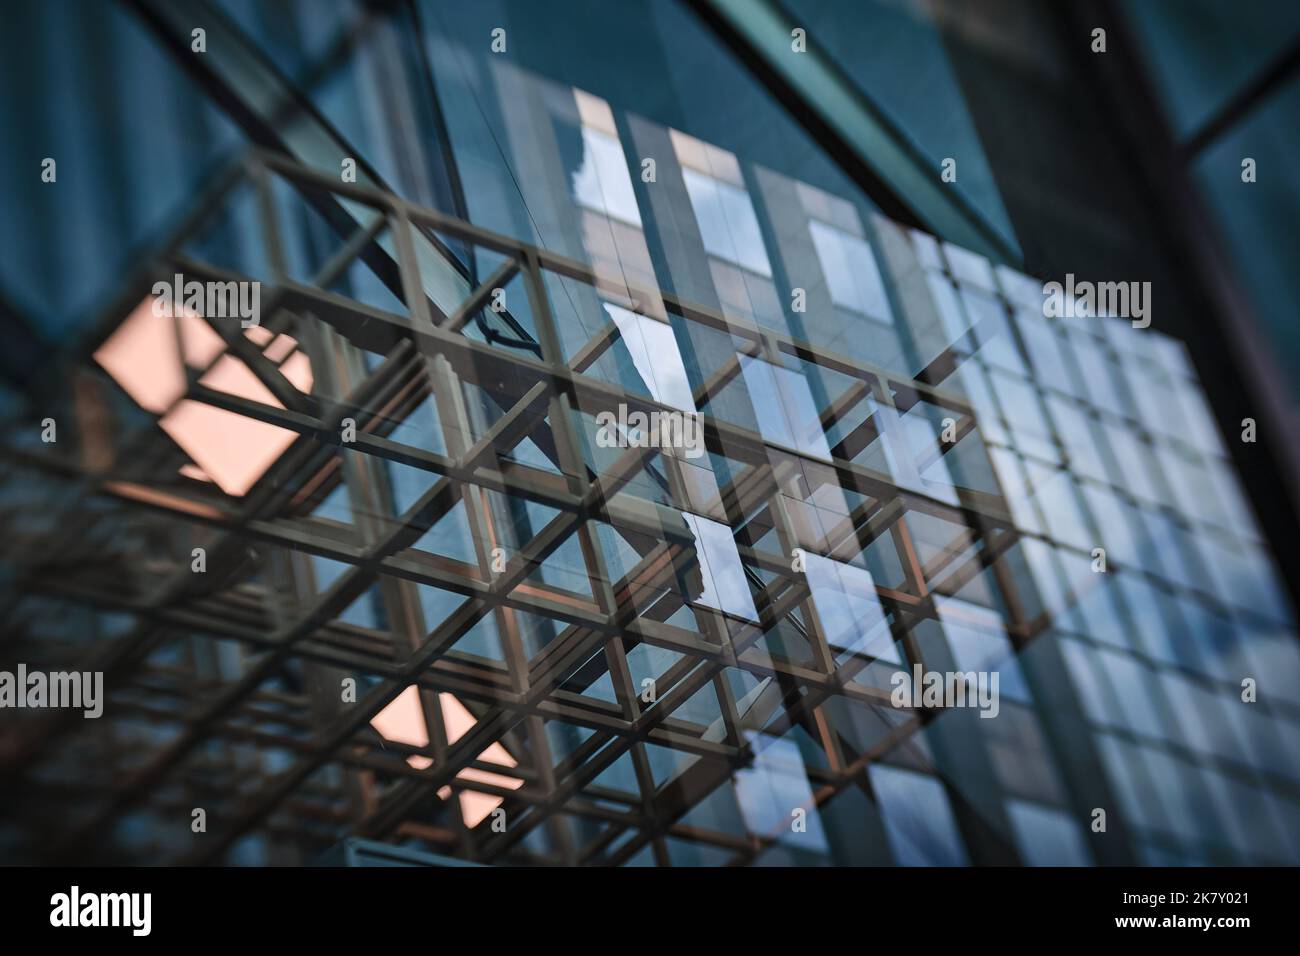 Closeup of Architectural element creating an abstract image that can be used as a background Stock Photo